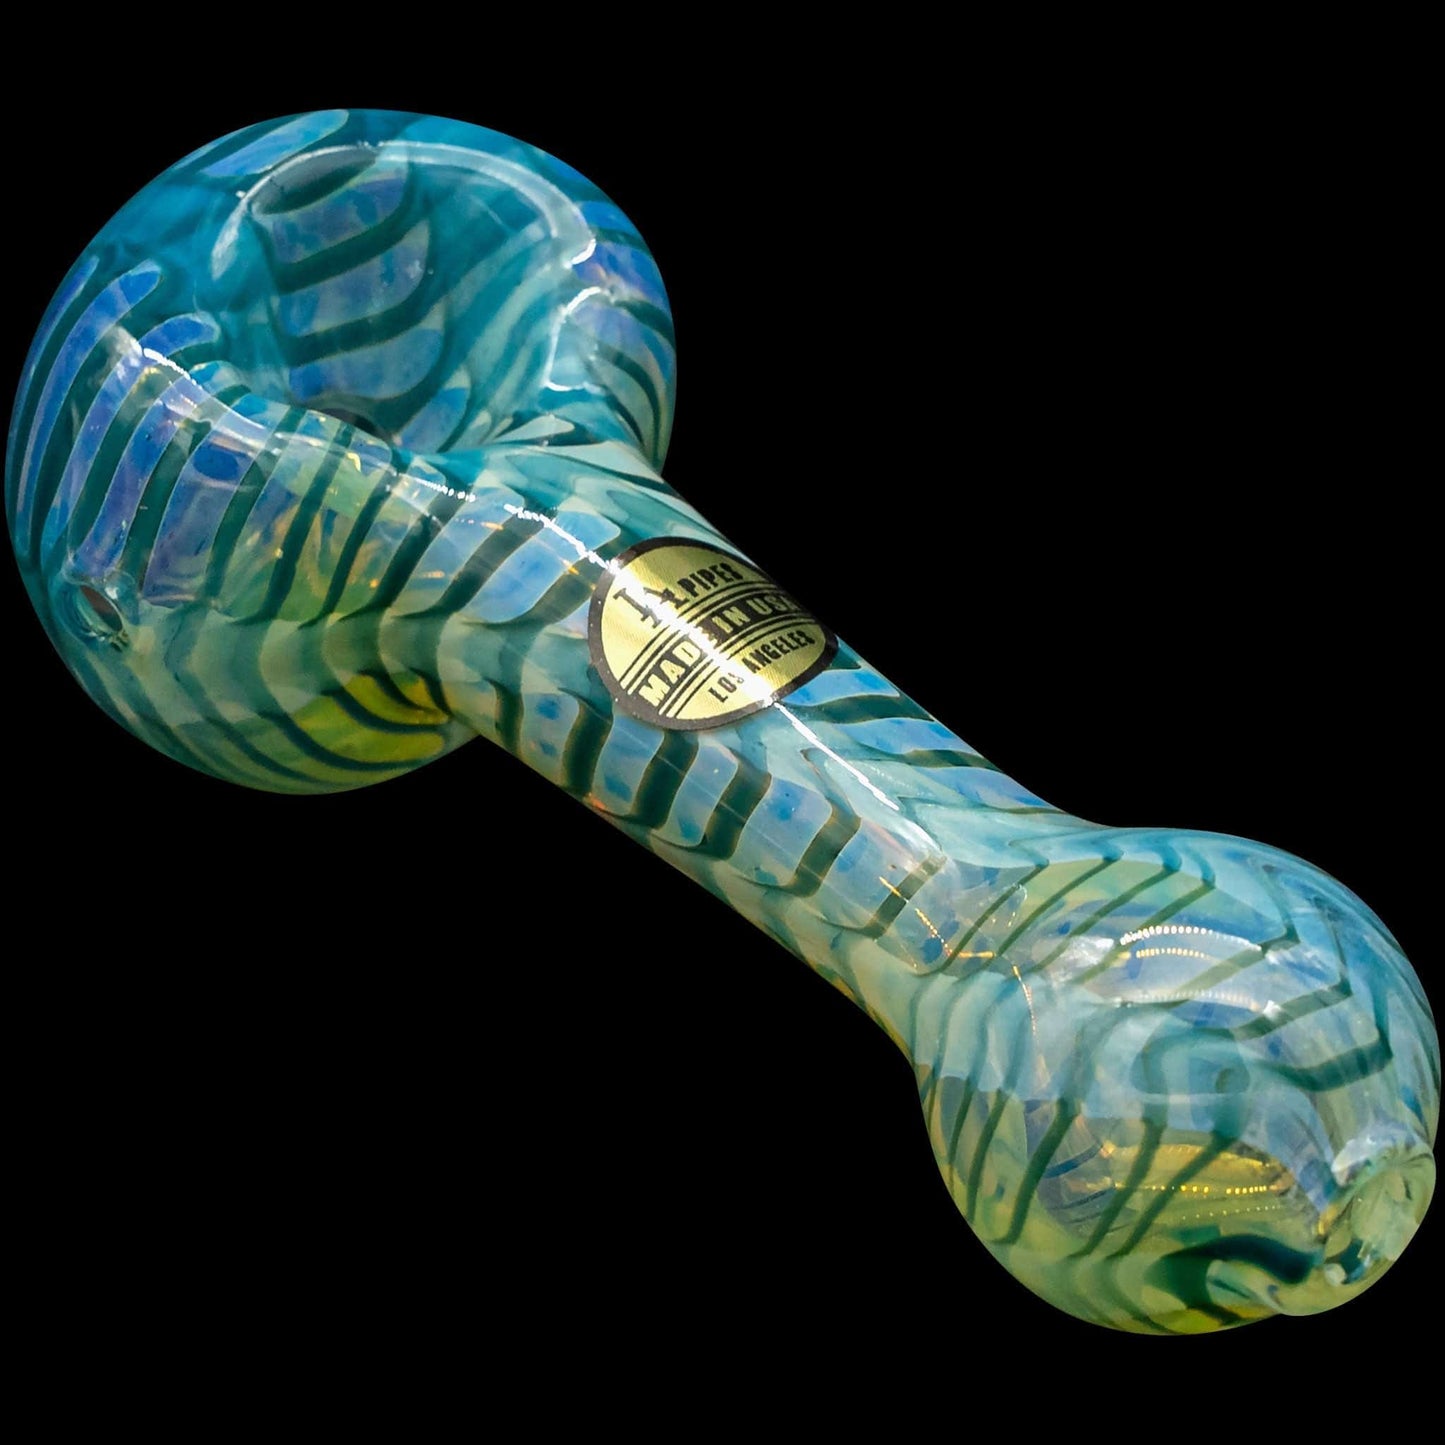 LA Pipes Hand Pipe Teal / Large "Raker" Glass Spoon Pipe